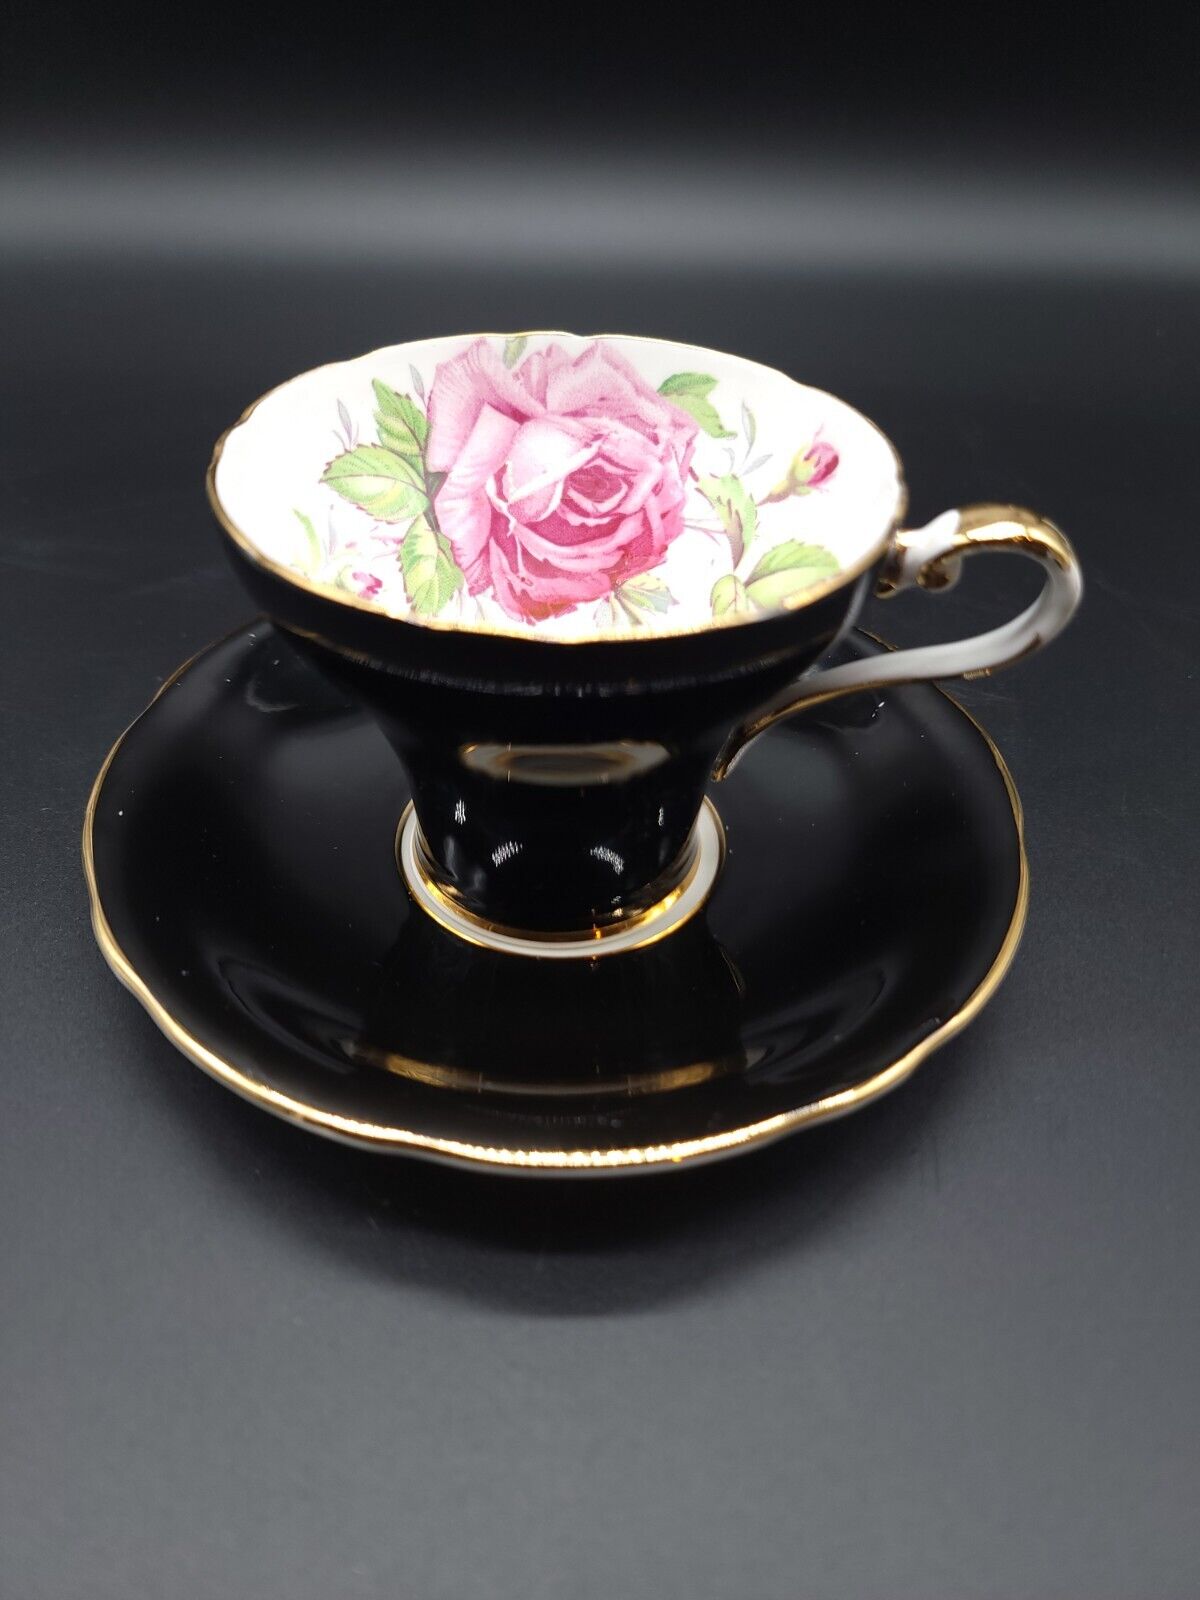 RARE-STUNNING AYNSLEY TEA CUP & SAUCER SET -Black with Gold w/PINK CABBAGE ROSE